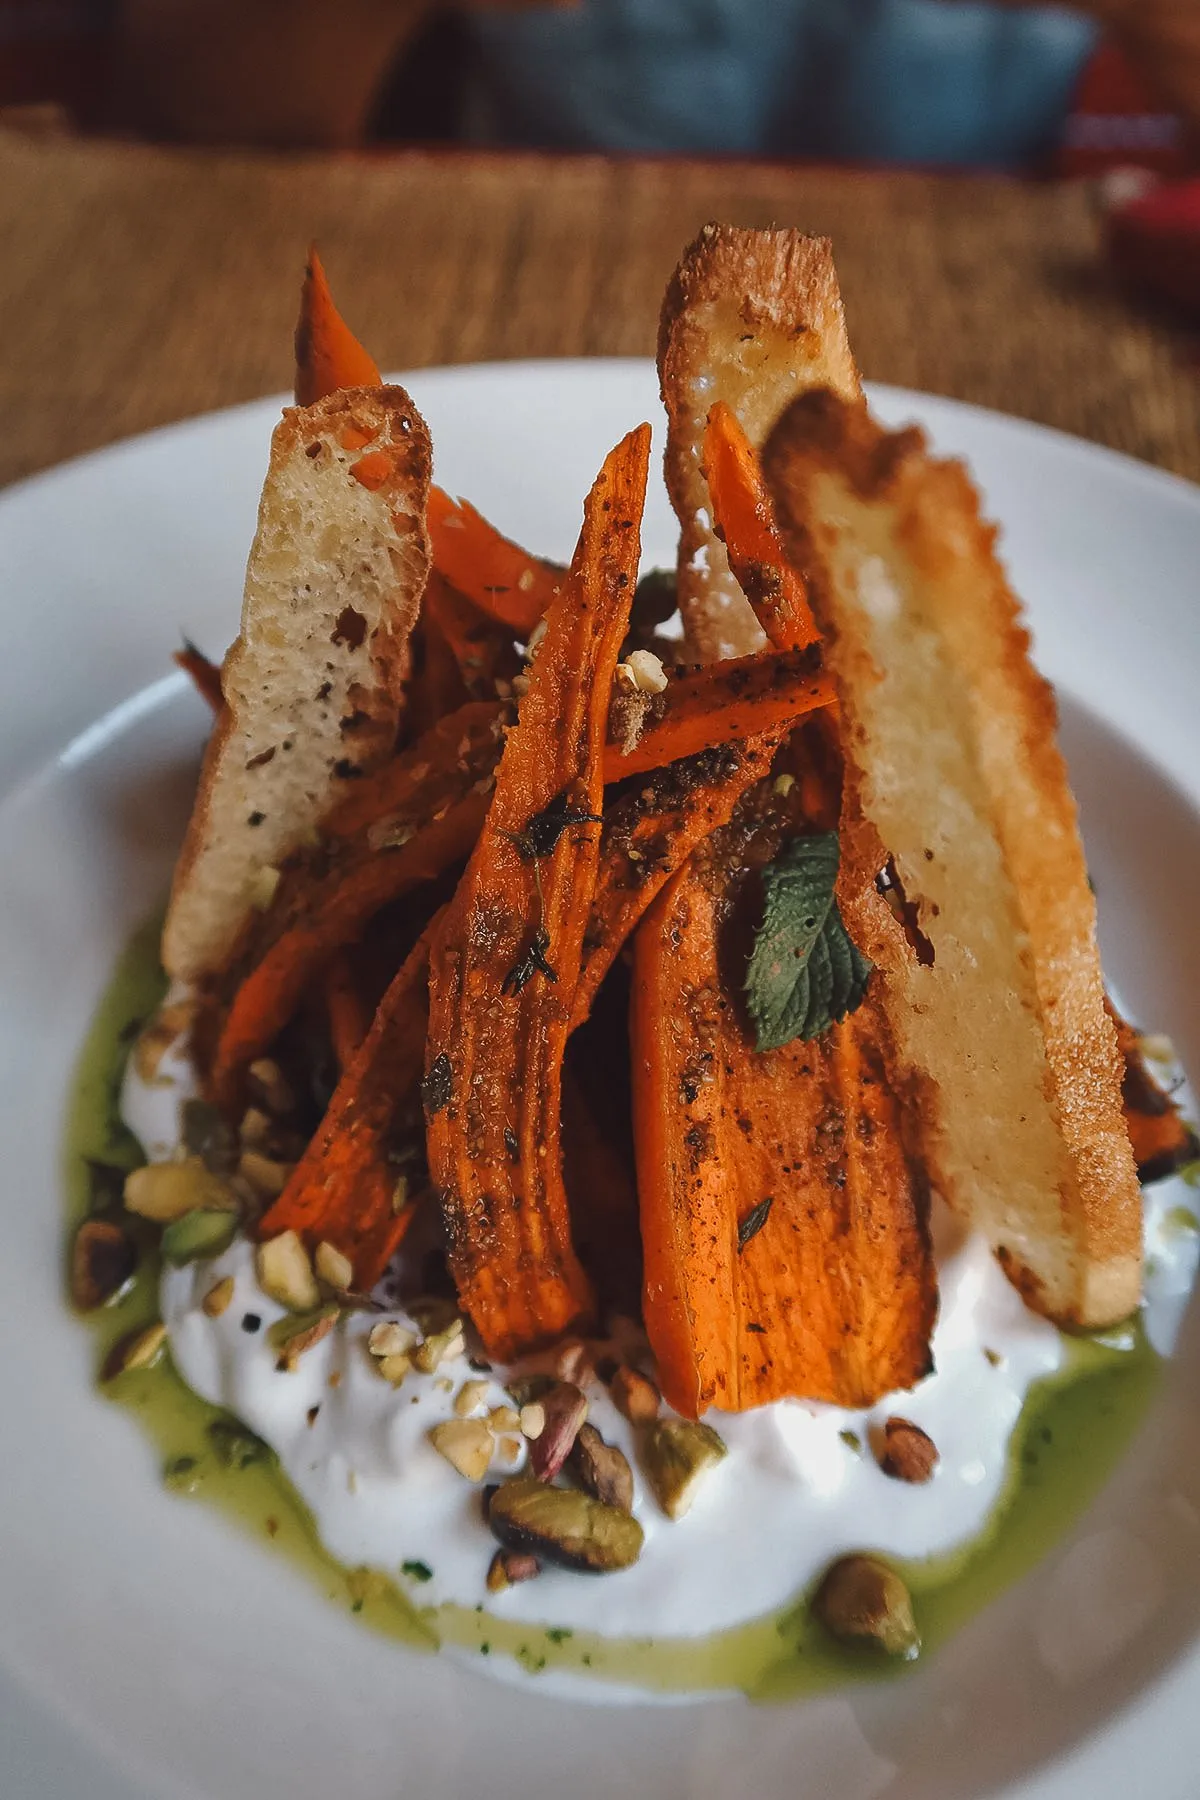 Roasted carrot salad at a restaurant in Marrakech